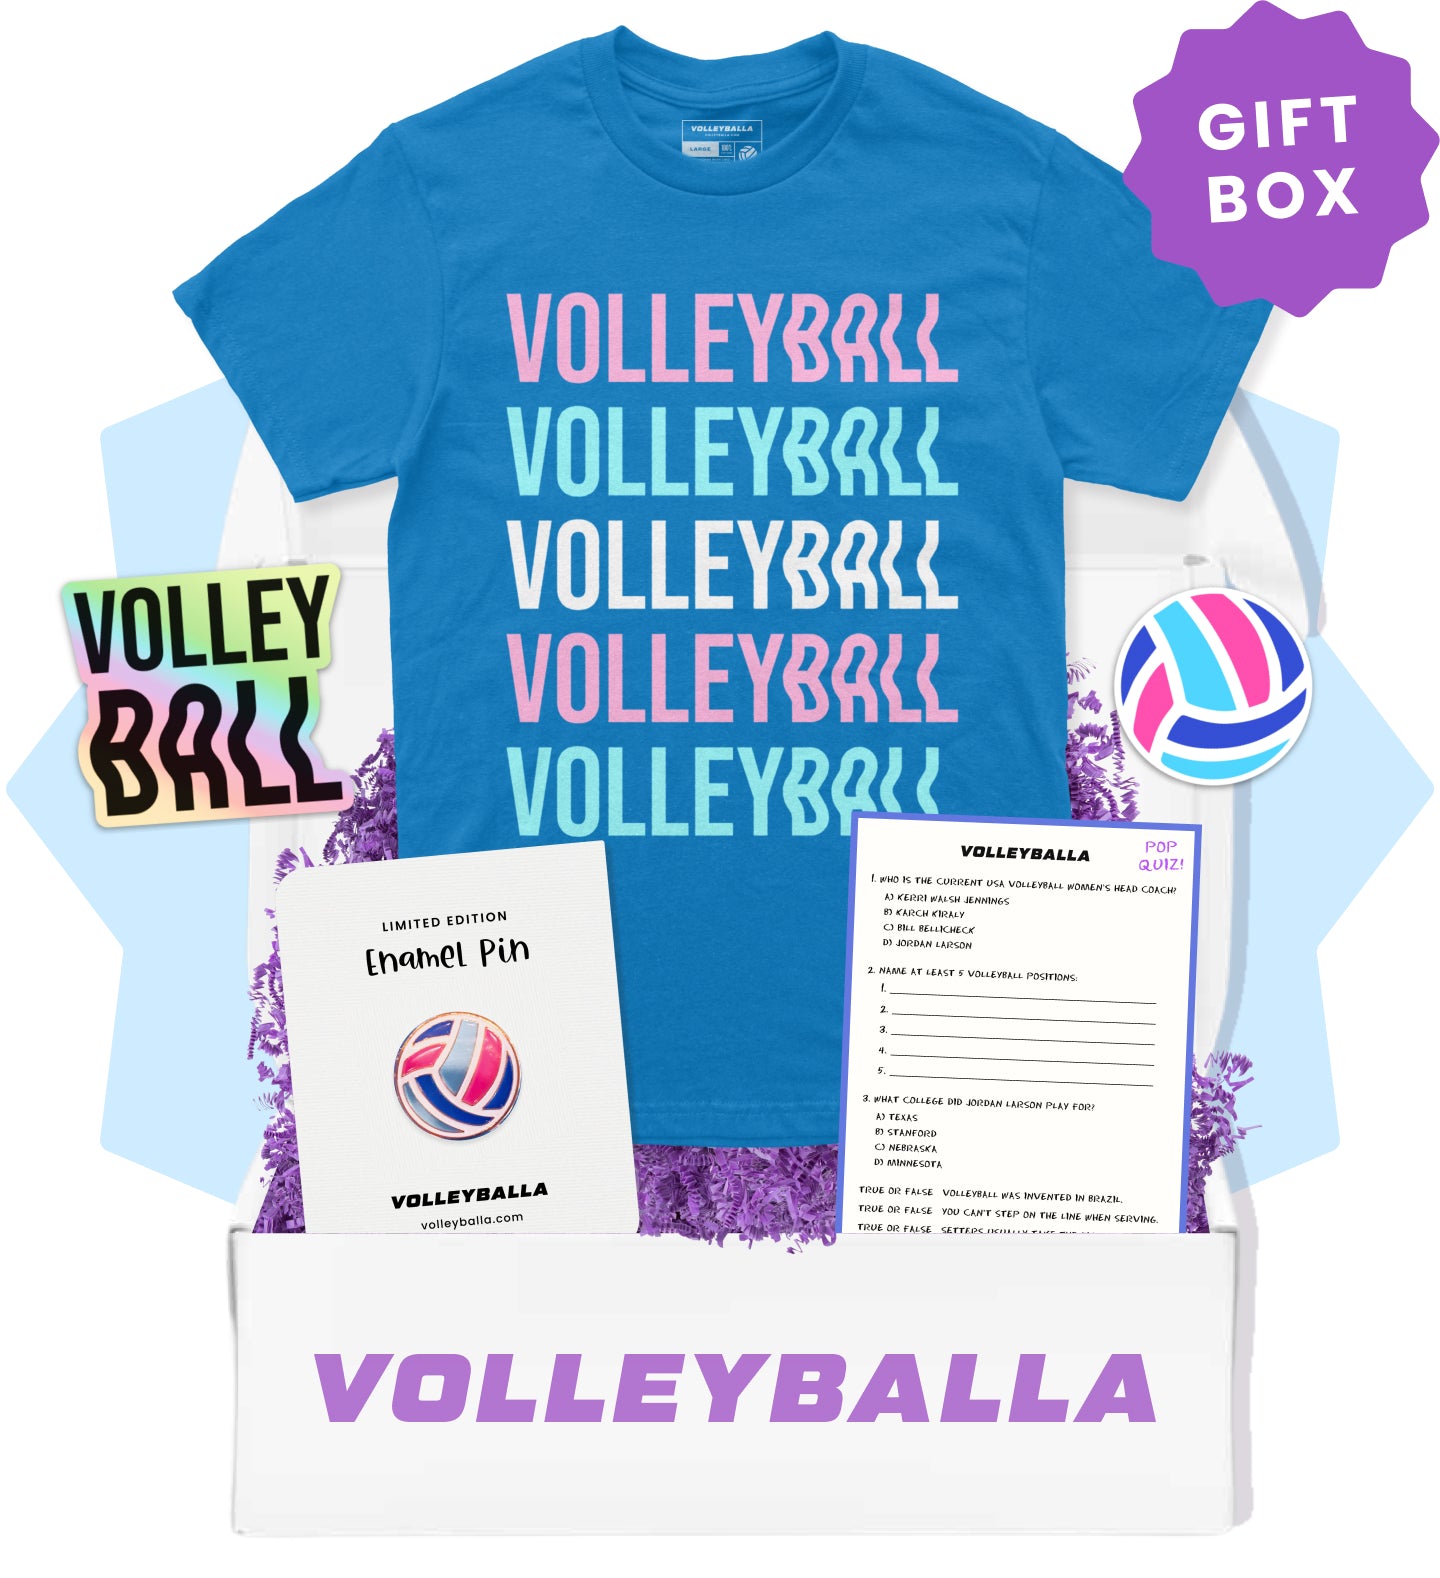 Make Volleyball Waves - Volleyball Gift Box